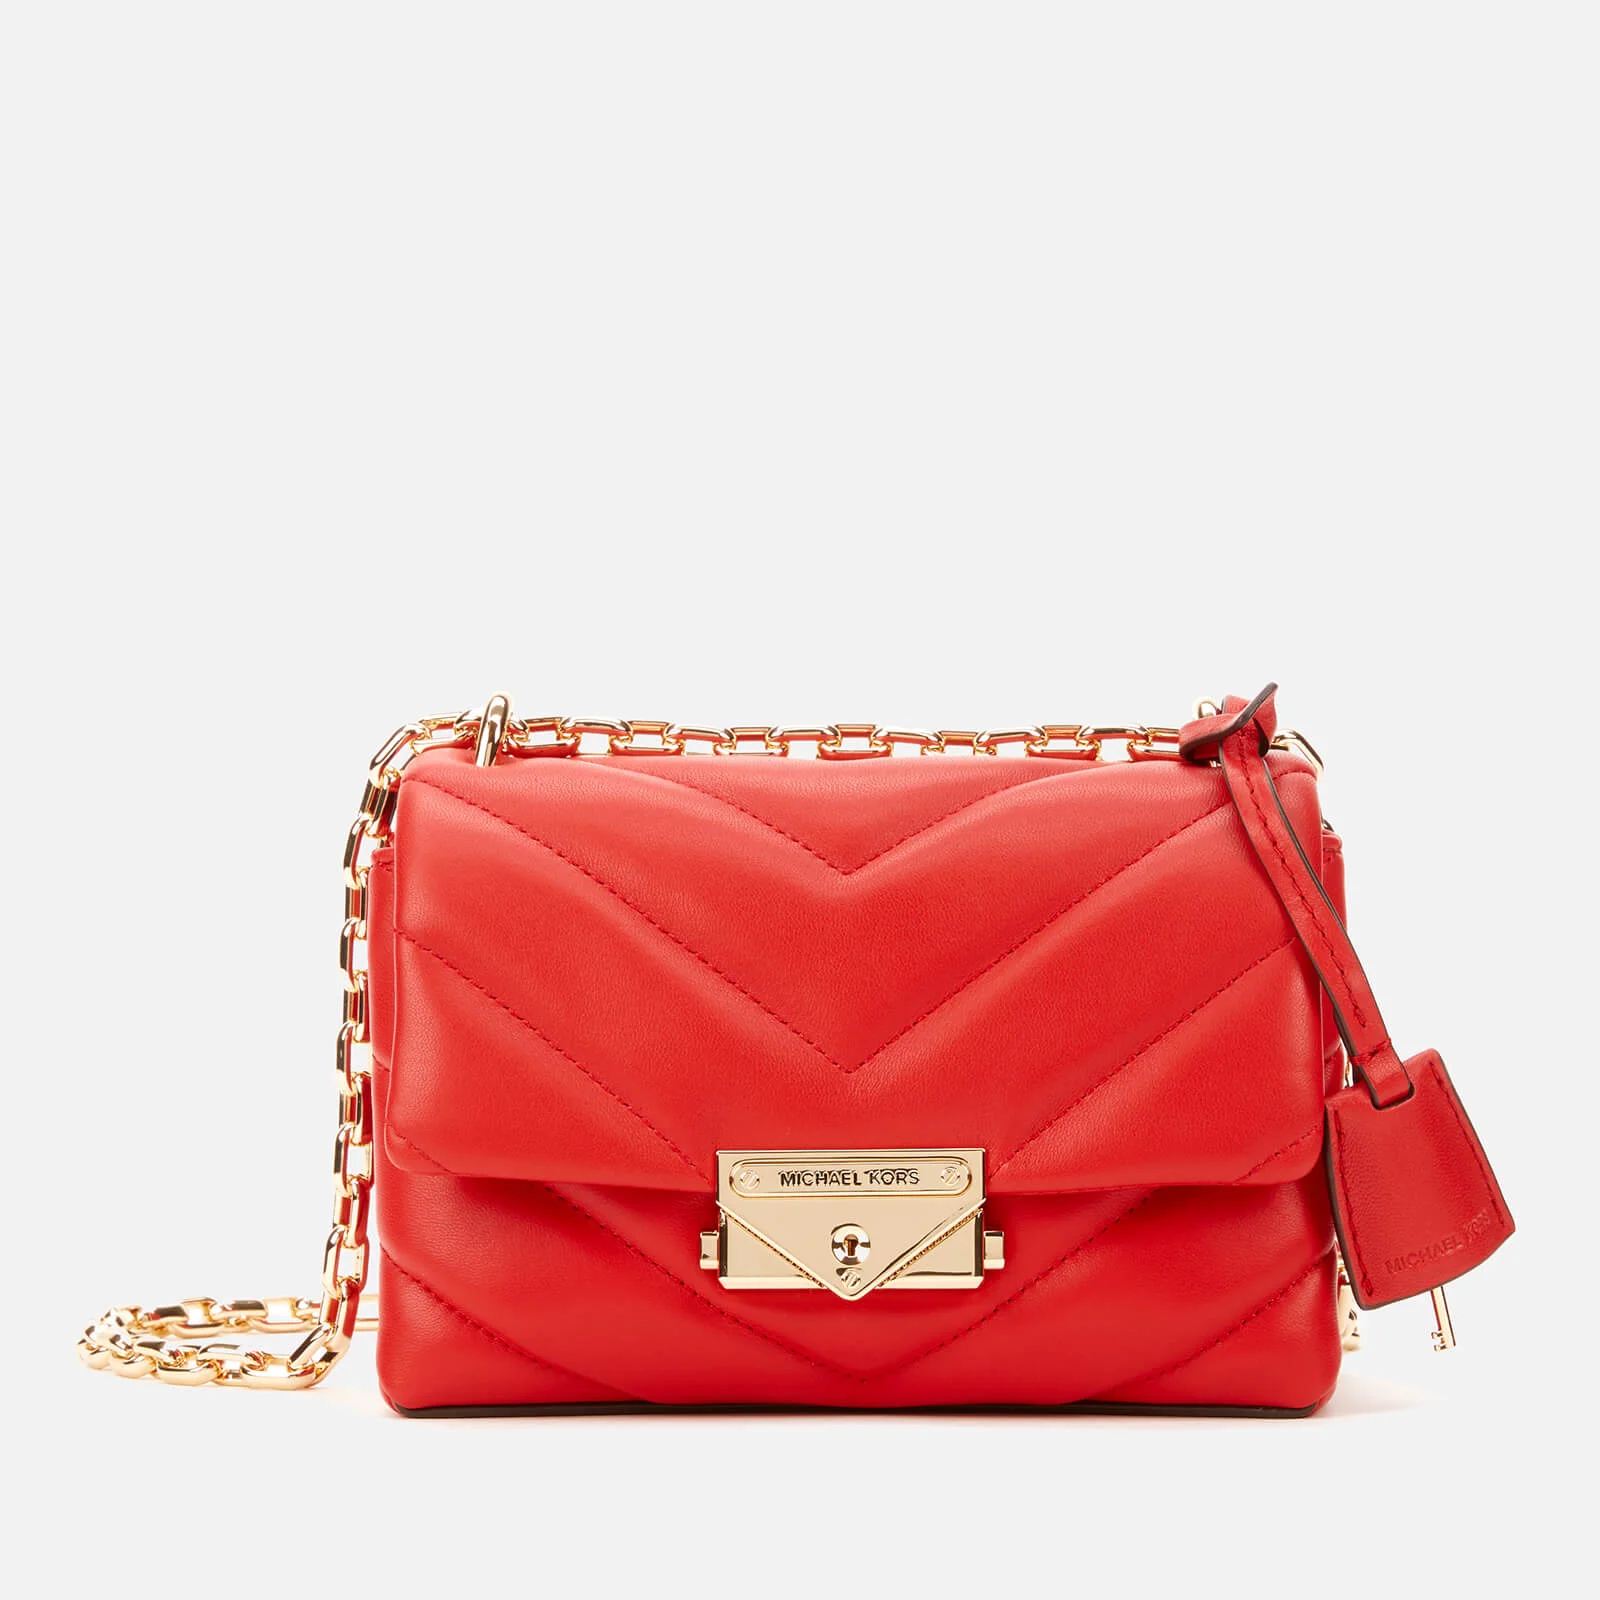 MICHAEL MICHAEL KORS Women's Cece Extra Small Chain Cross Body Bag - Bright Red Image 1